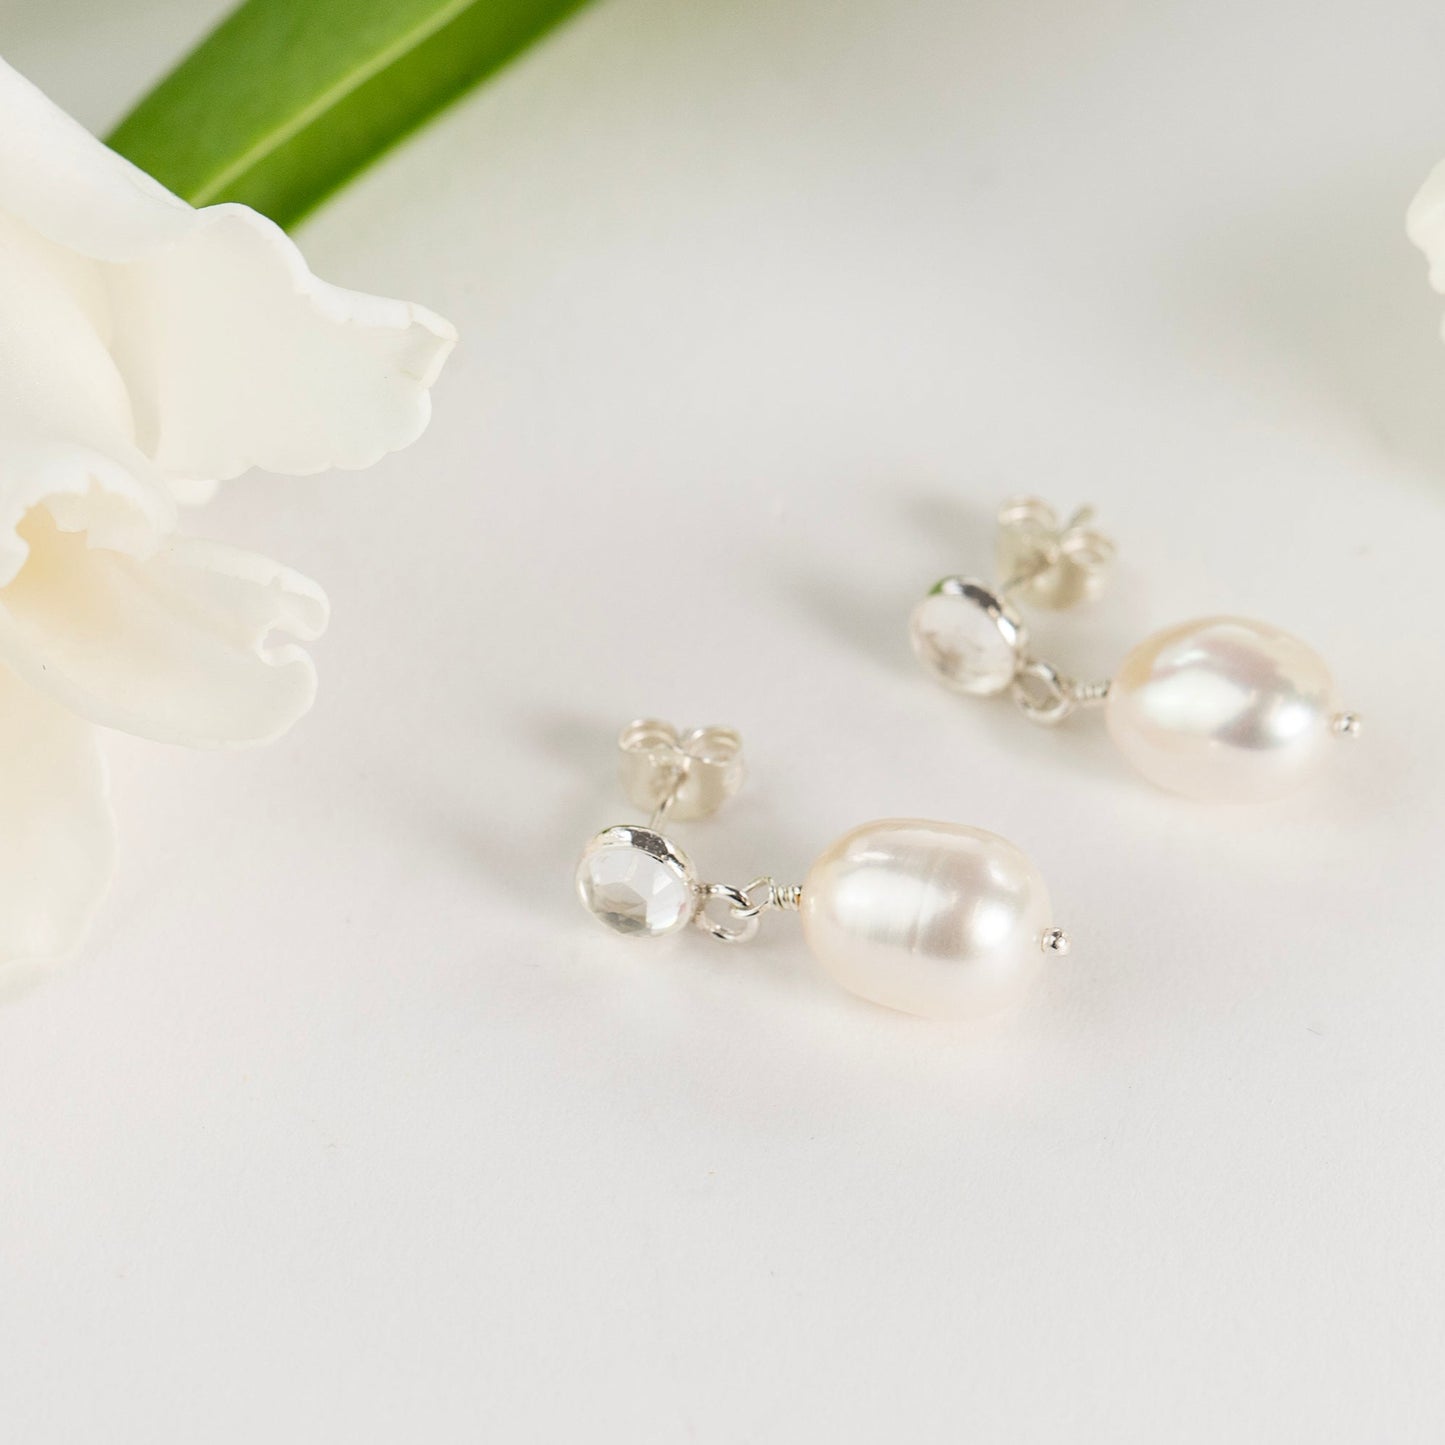 Thank You Gift - White Topaz & Pearl Earrings - Silver & Gold